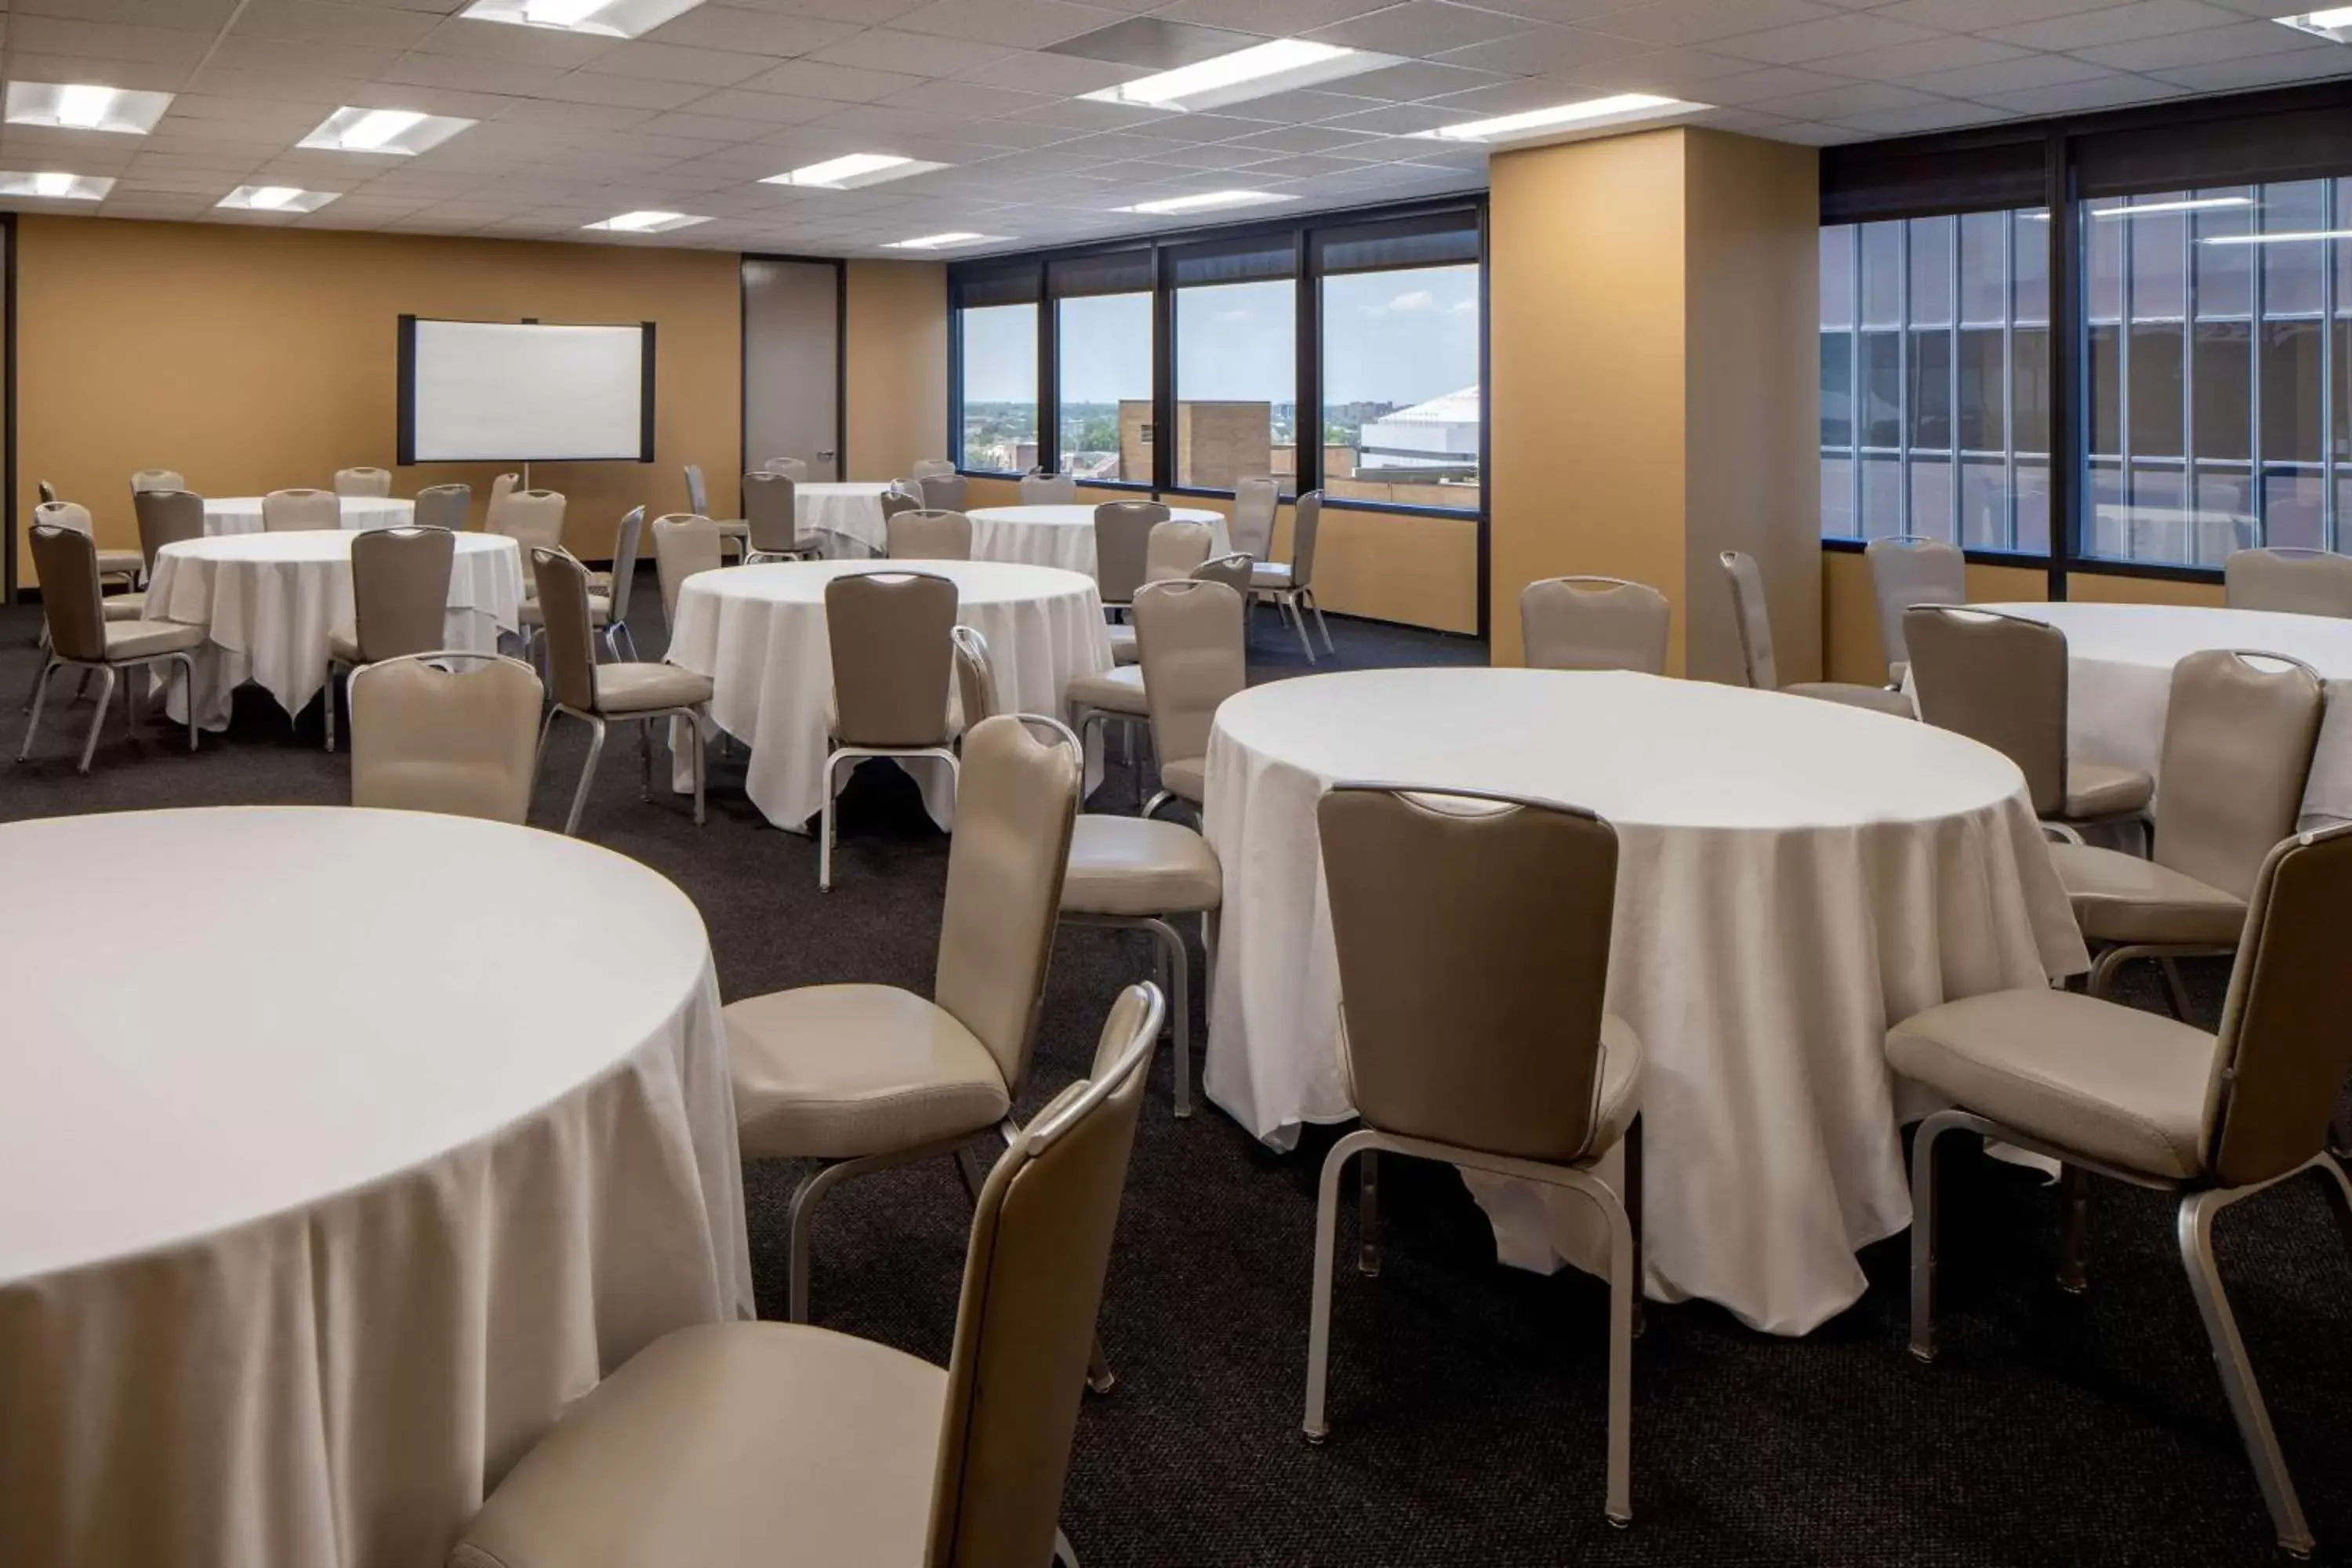 Meeting/conference room, Banquet Facilities in Hyatt House New Orleans Downtown